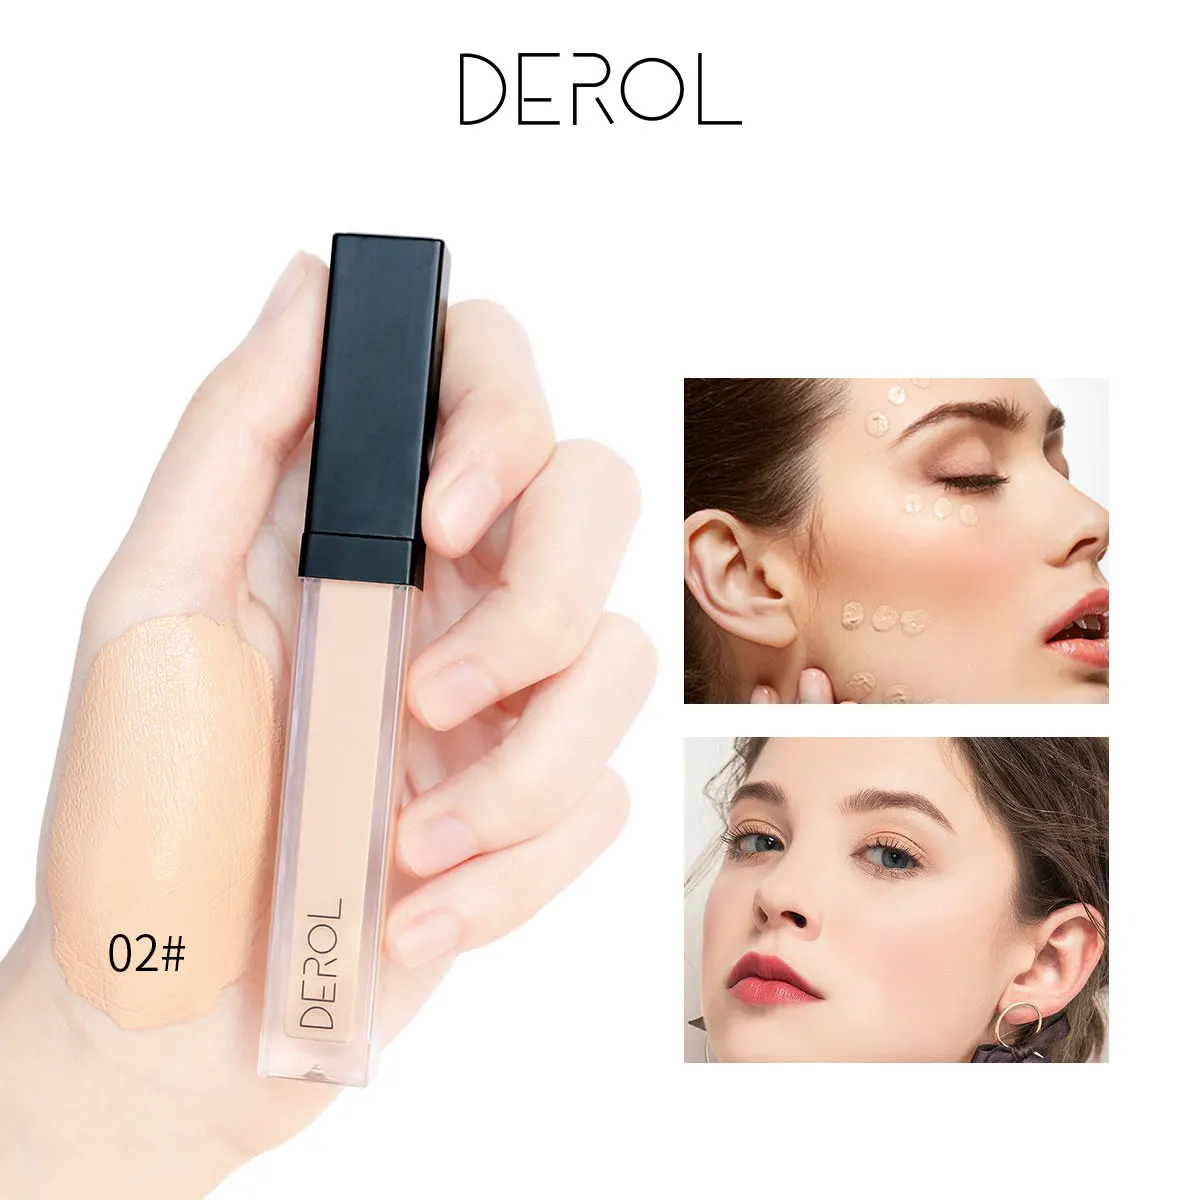 

DEROL Concealer Isolate Cover Dark Circles Acne Marks And Spots Natural Nude Makeup Foundation Concealer liquid stockings Raben